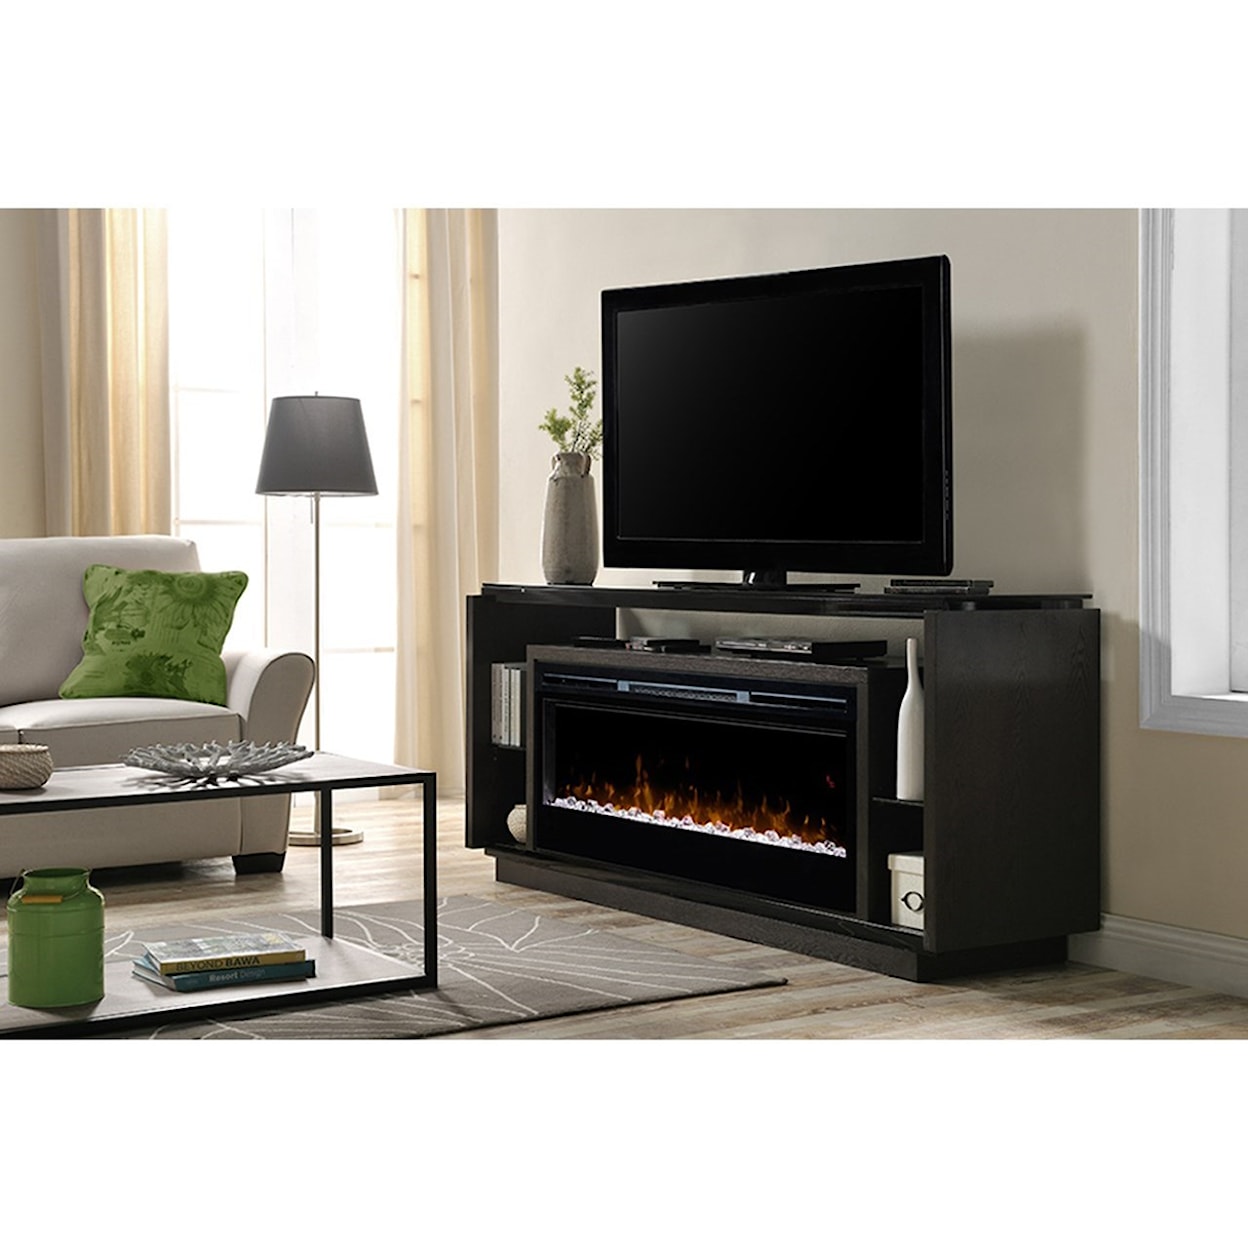 Dimplex David Fireplace and T.V. Stand